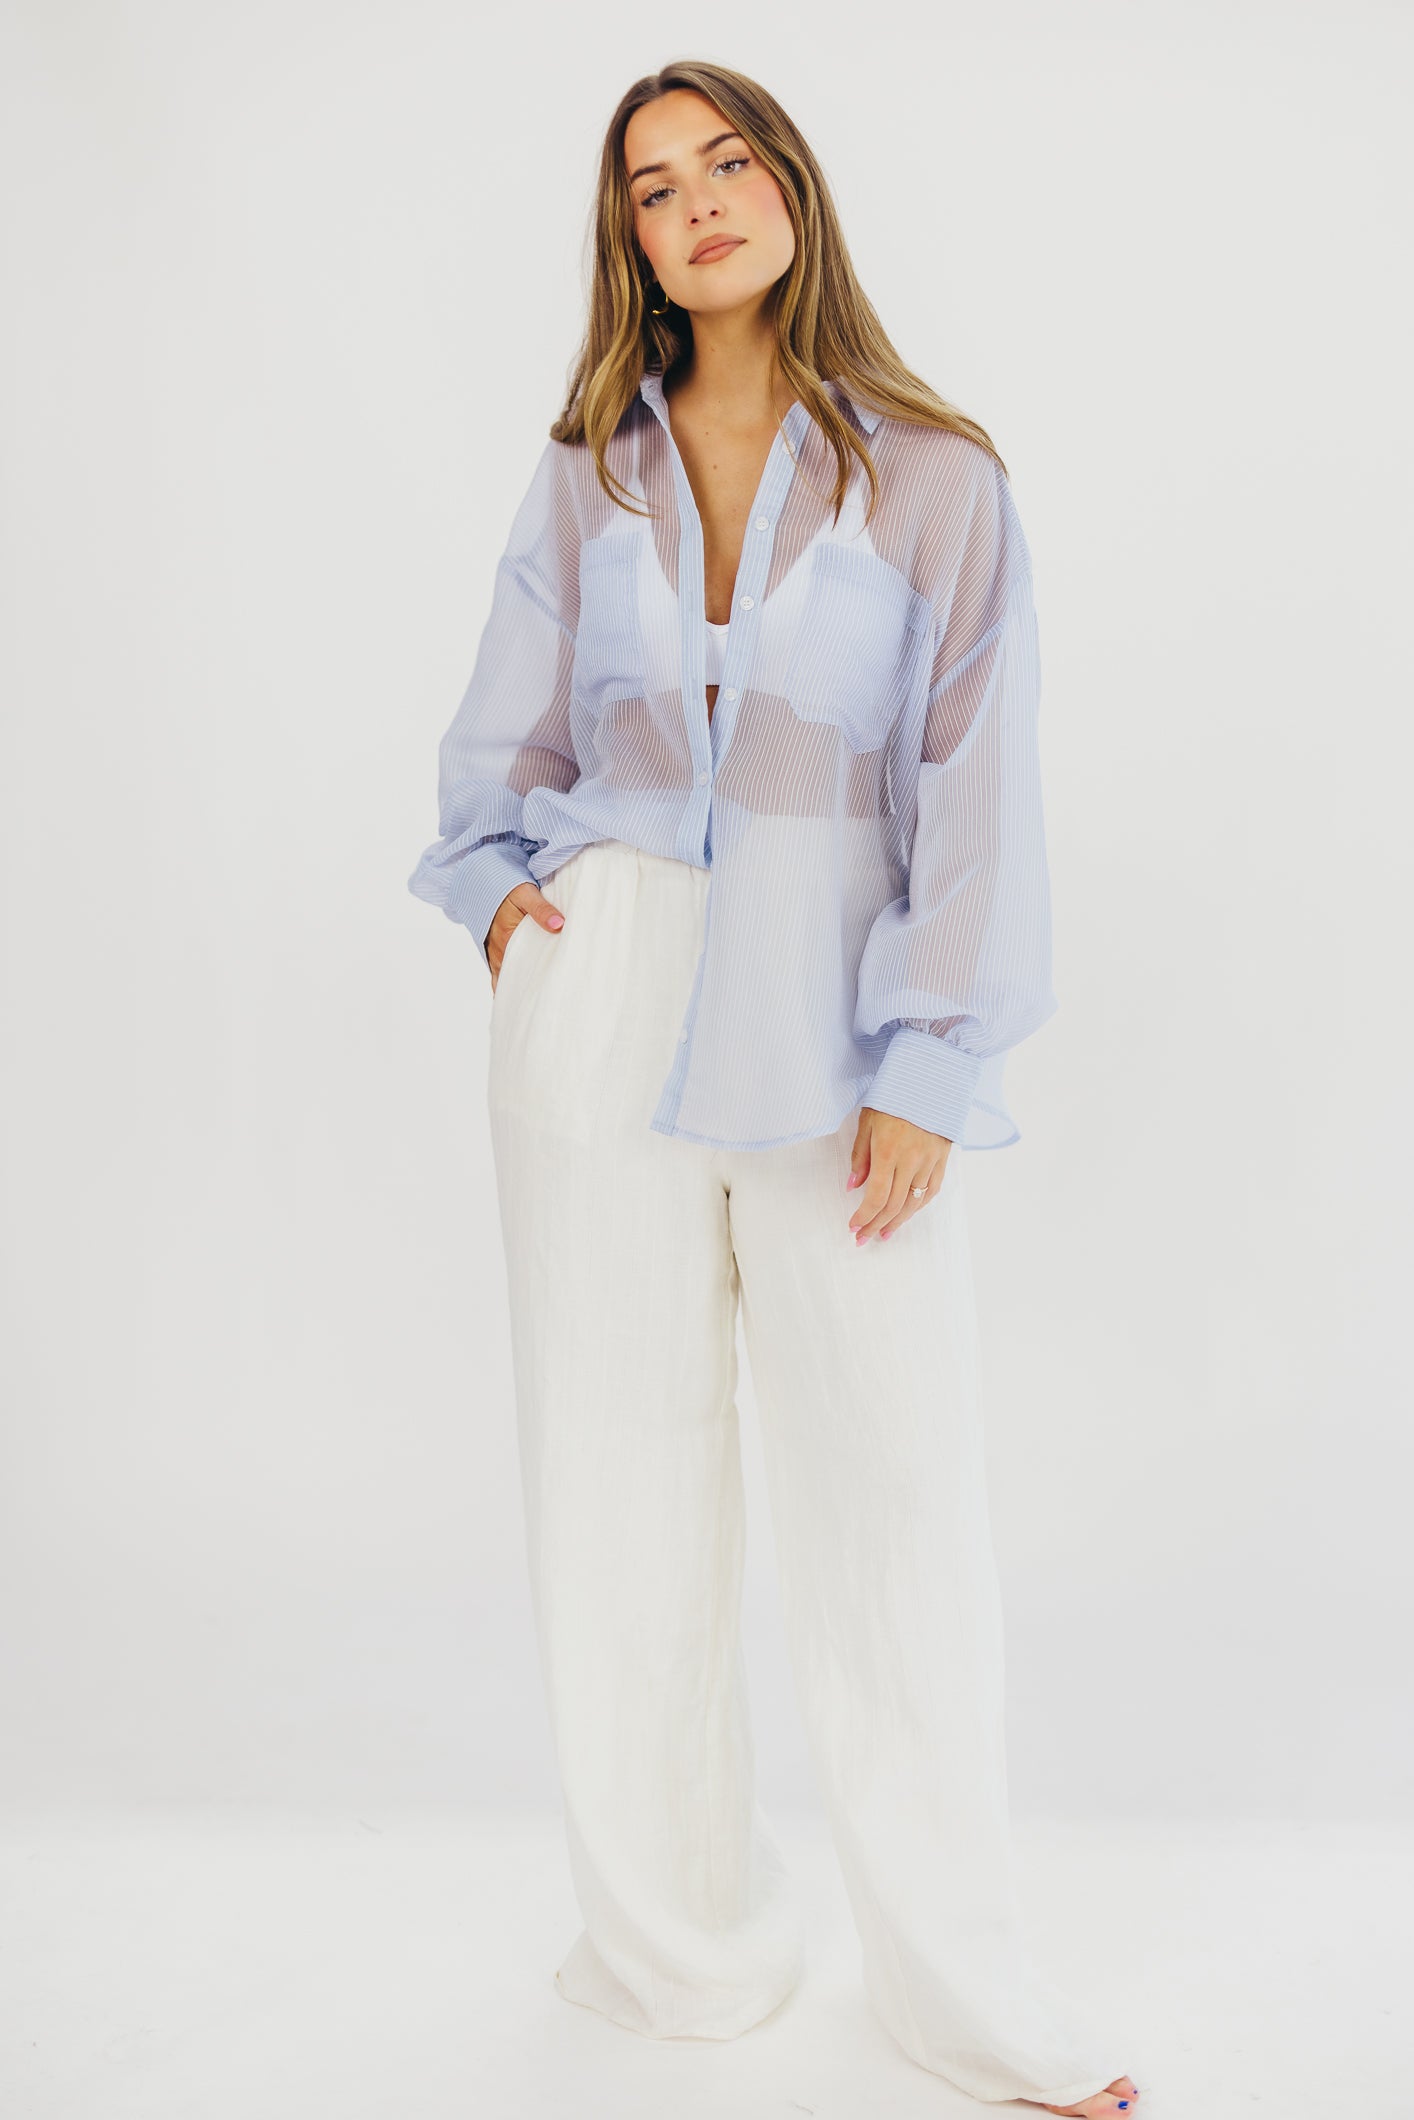 Katie Sheer Button-Up in Dusty Blue